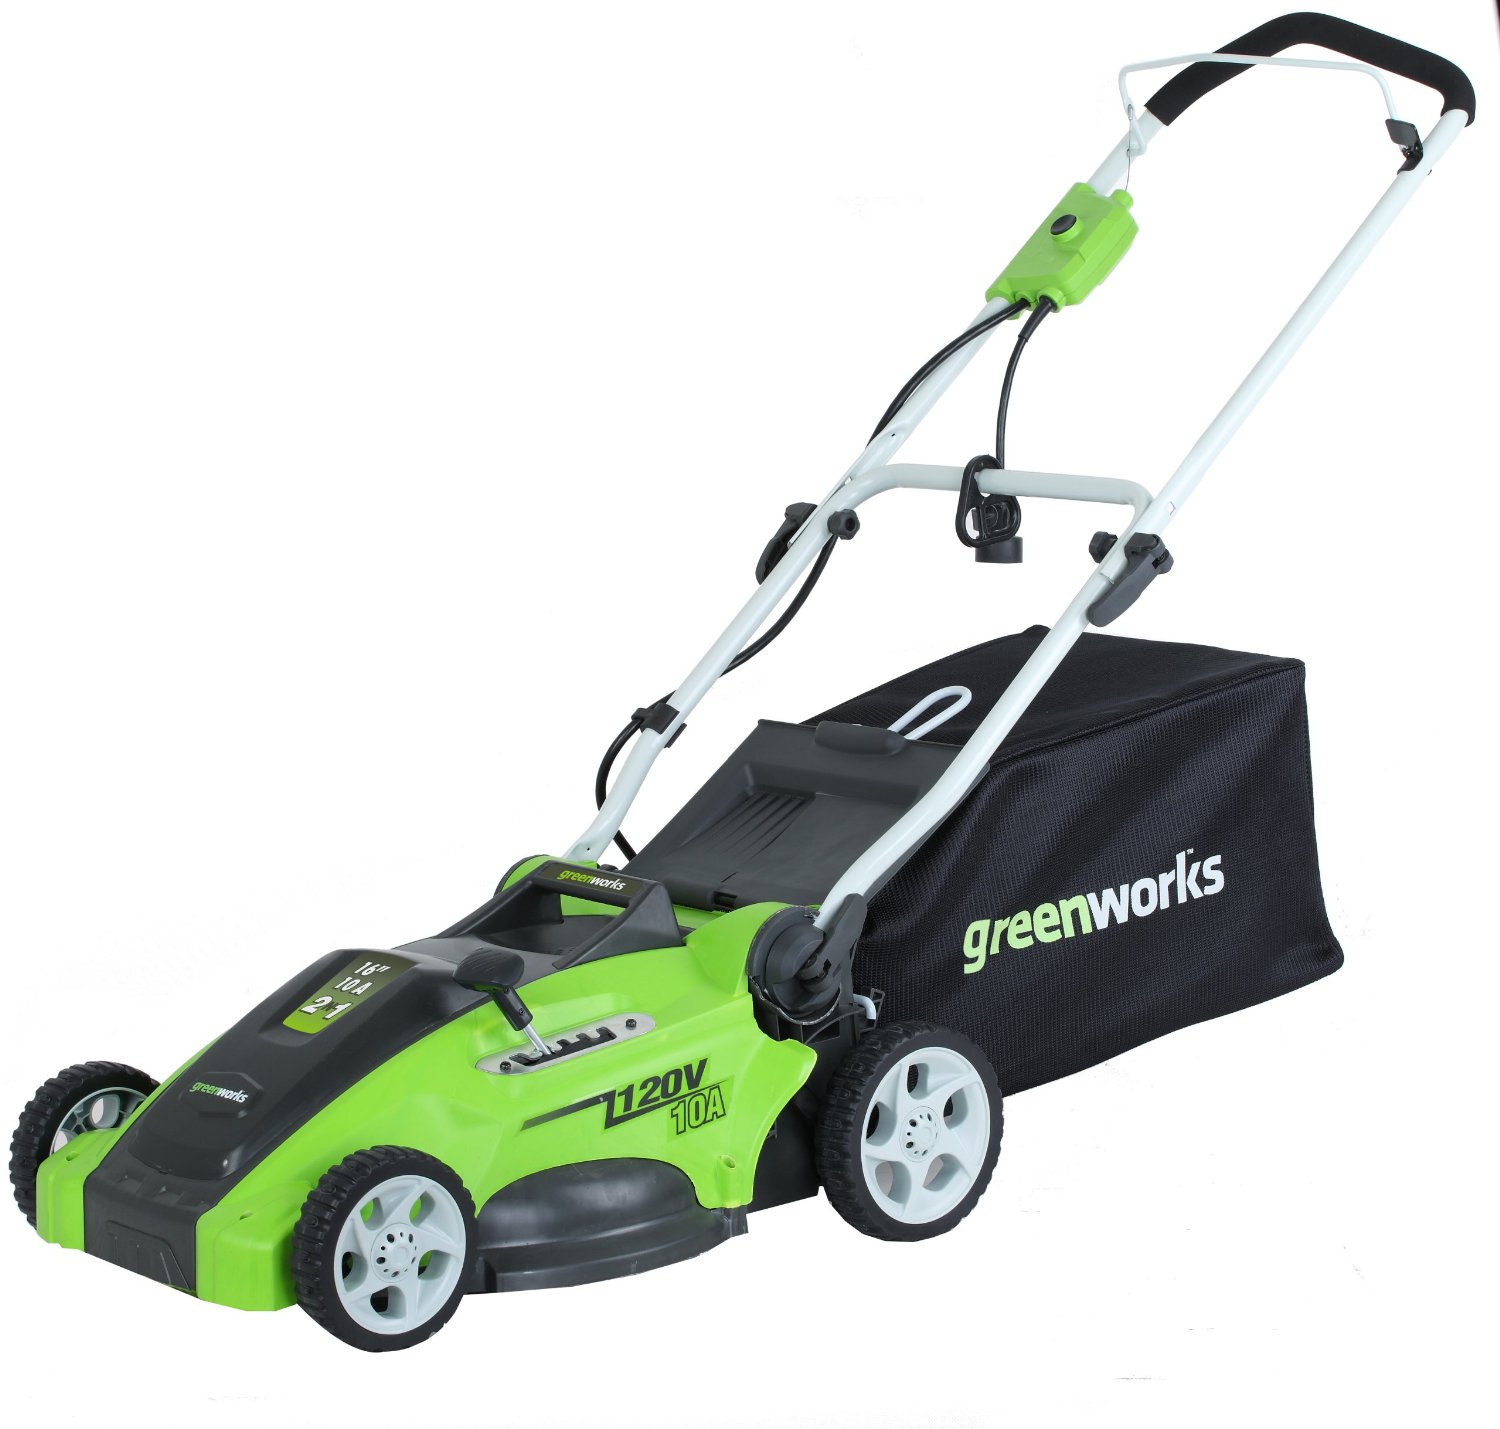 Greenworks 25142 Electric Lawn Mower Review